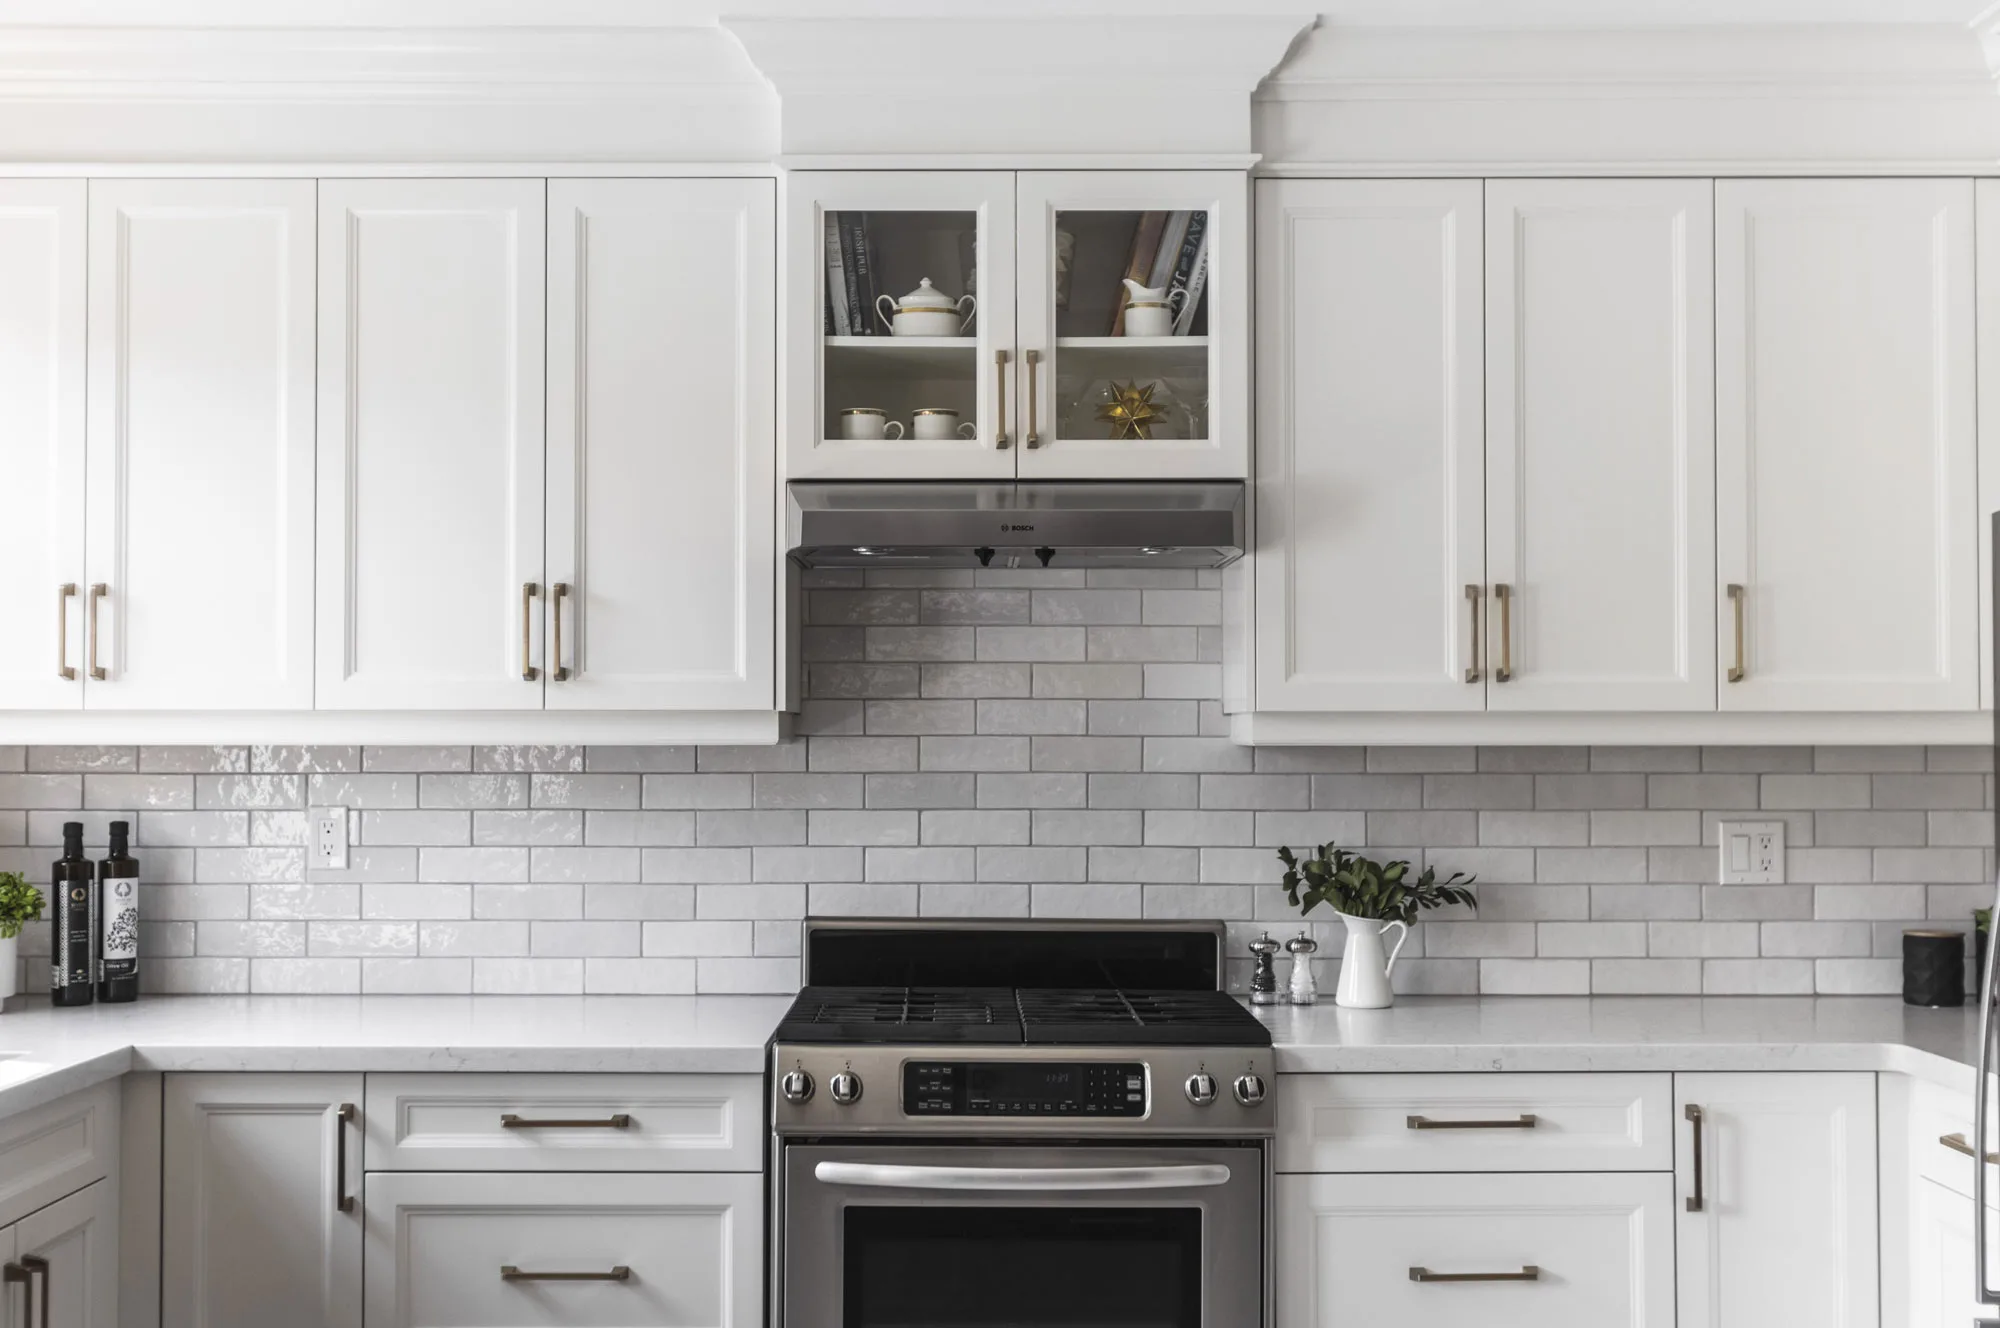 A kitchen with white upper and lower cupboards with silver handles with a stainless steel oven and hood with white and light grey subway tile backsplash